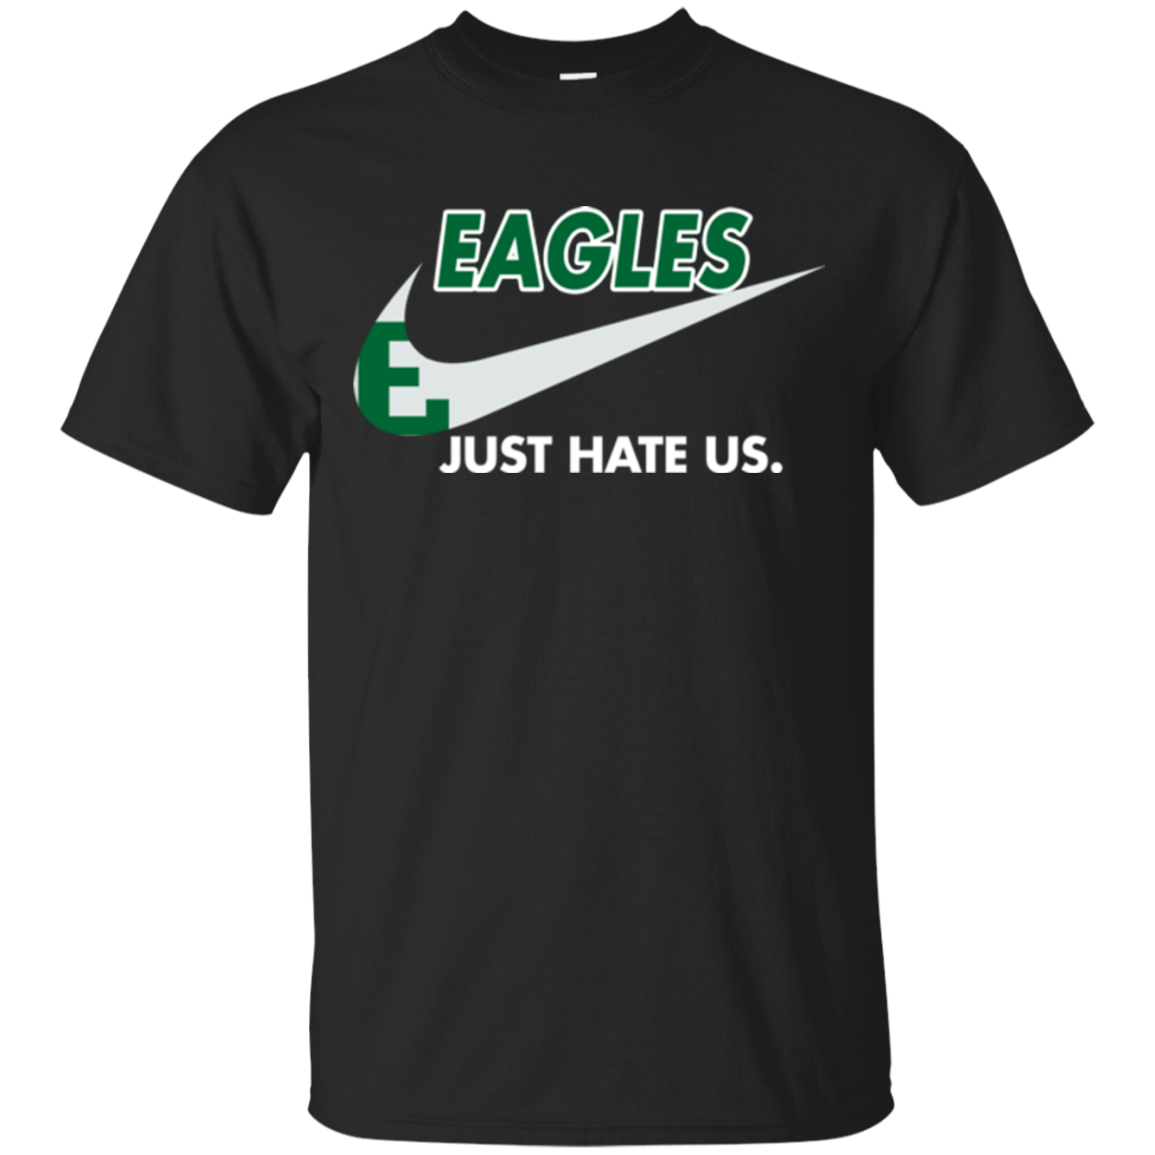 EASTERN MICHIGAN EAGLES T shirts Just Hate Us - Amyna